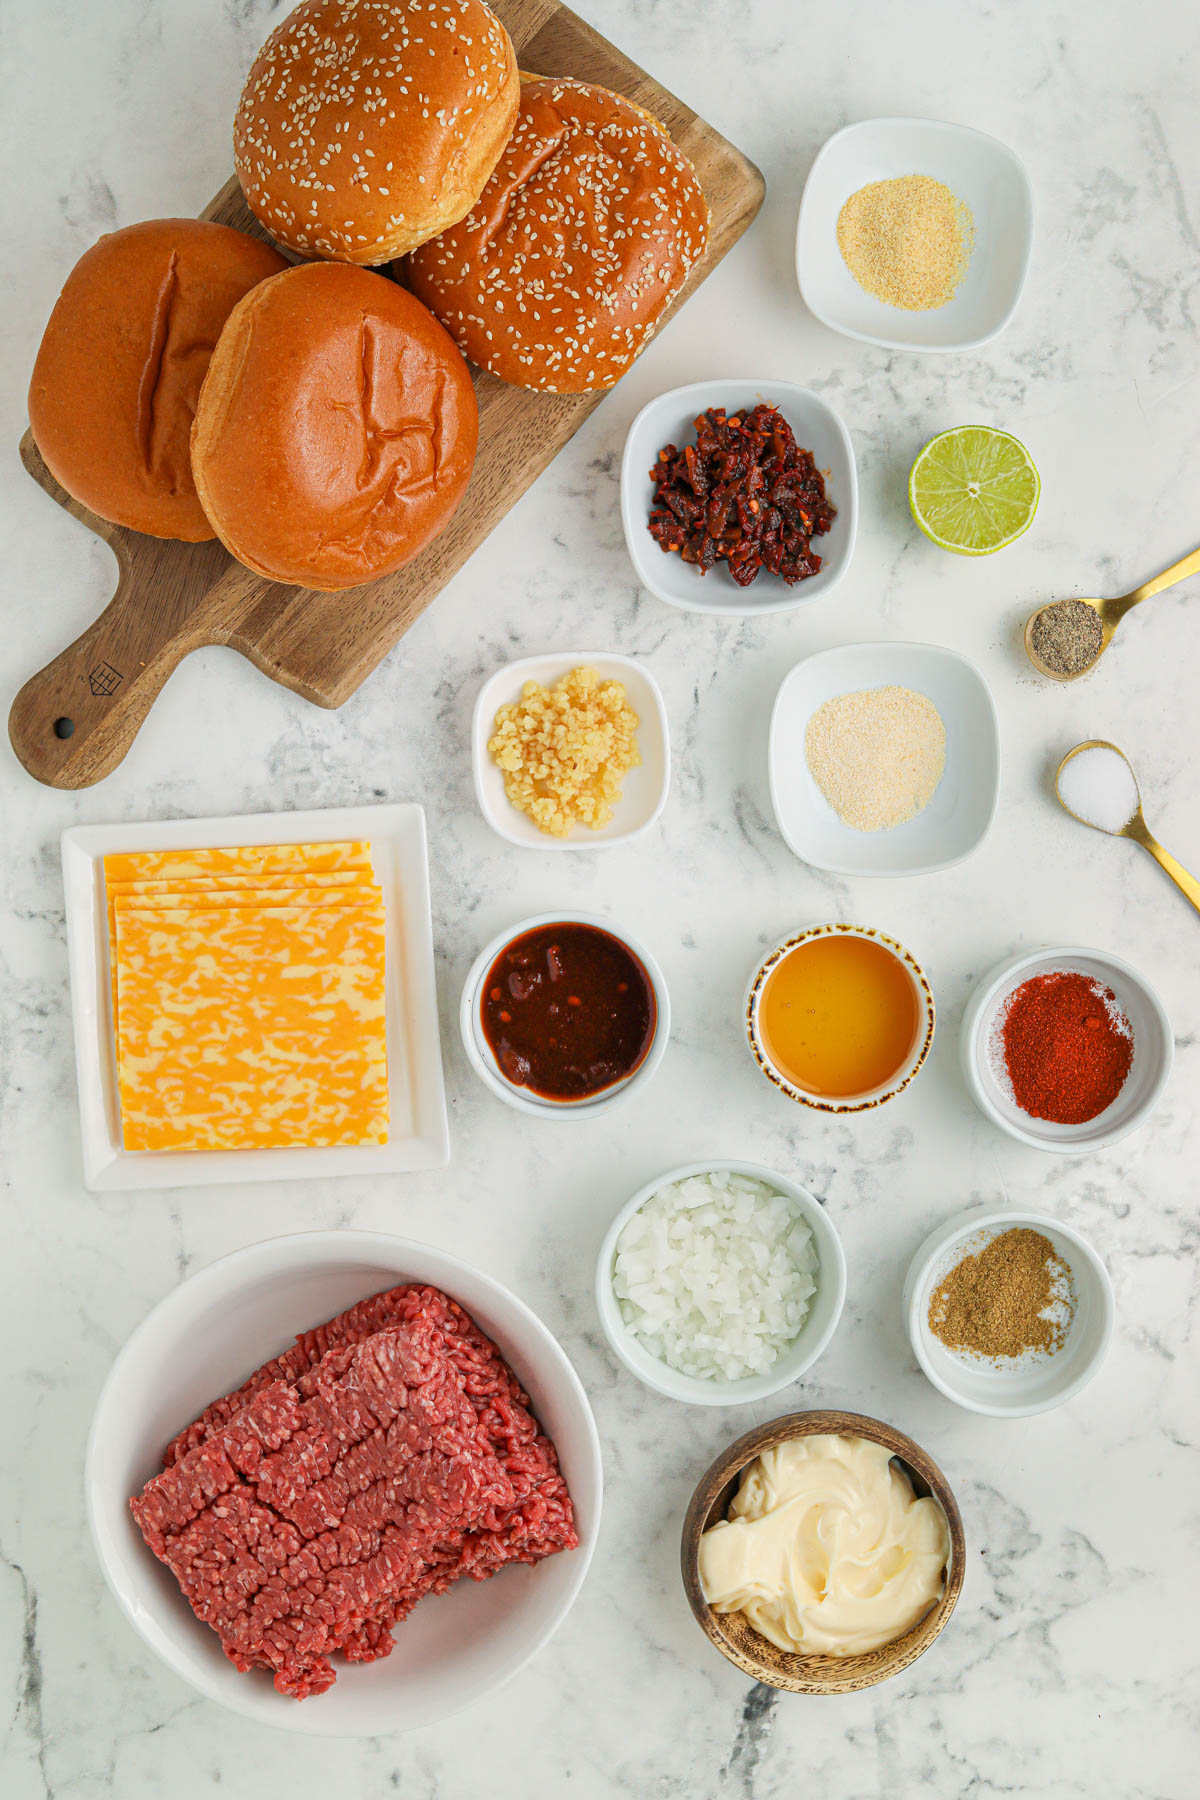 Overhead image of small bowls and plates containing ingredients for chipotle burgers.